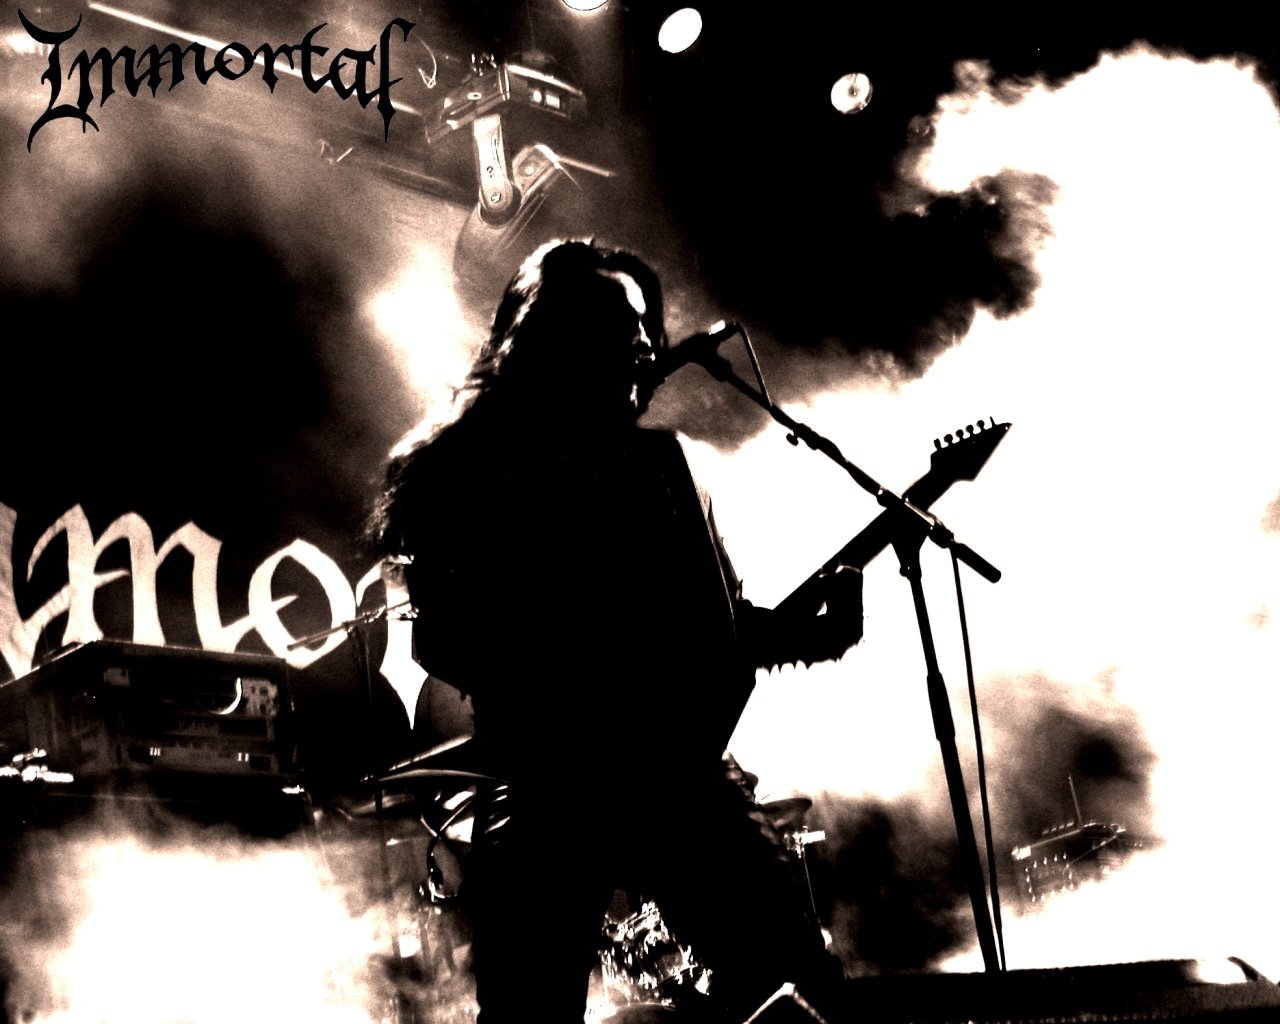 Download hd 1280x1024 Immortal PC background ID:457762 for free